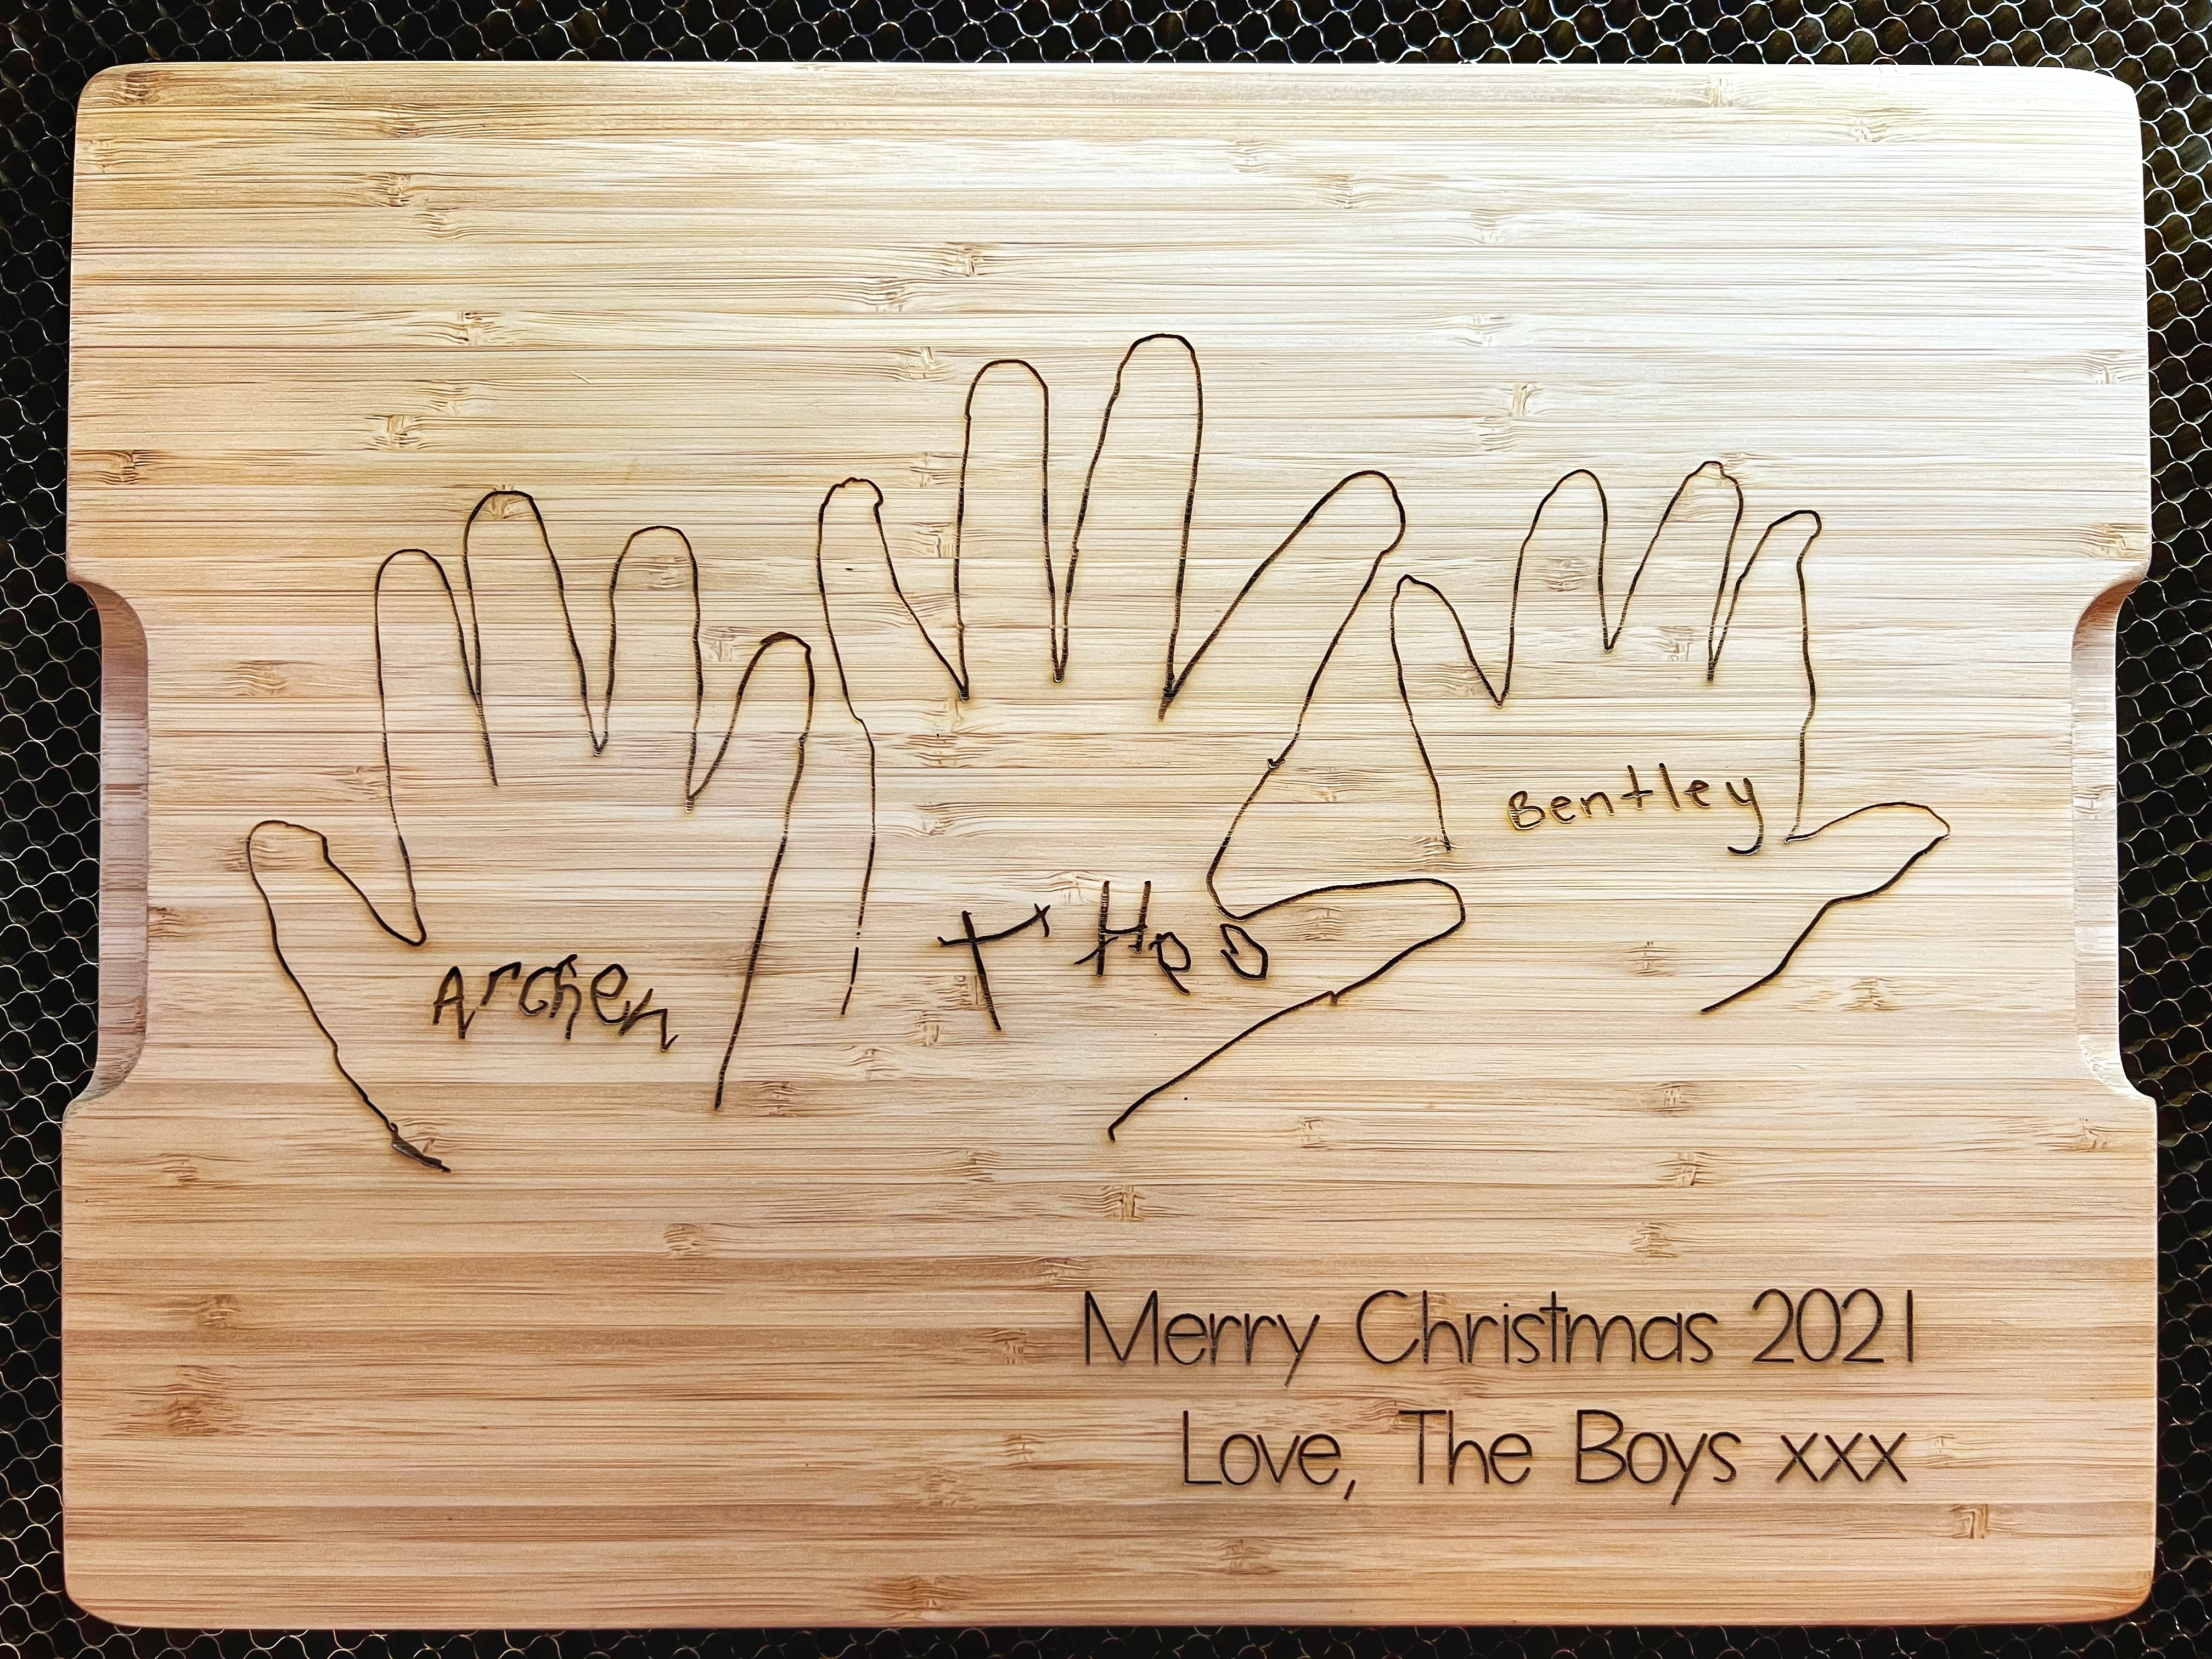 handprints etched onto a chopping board